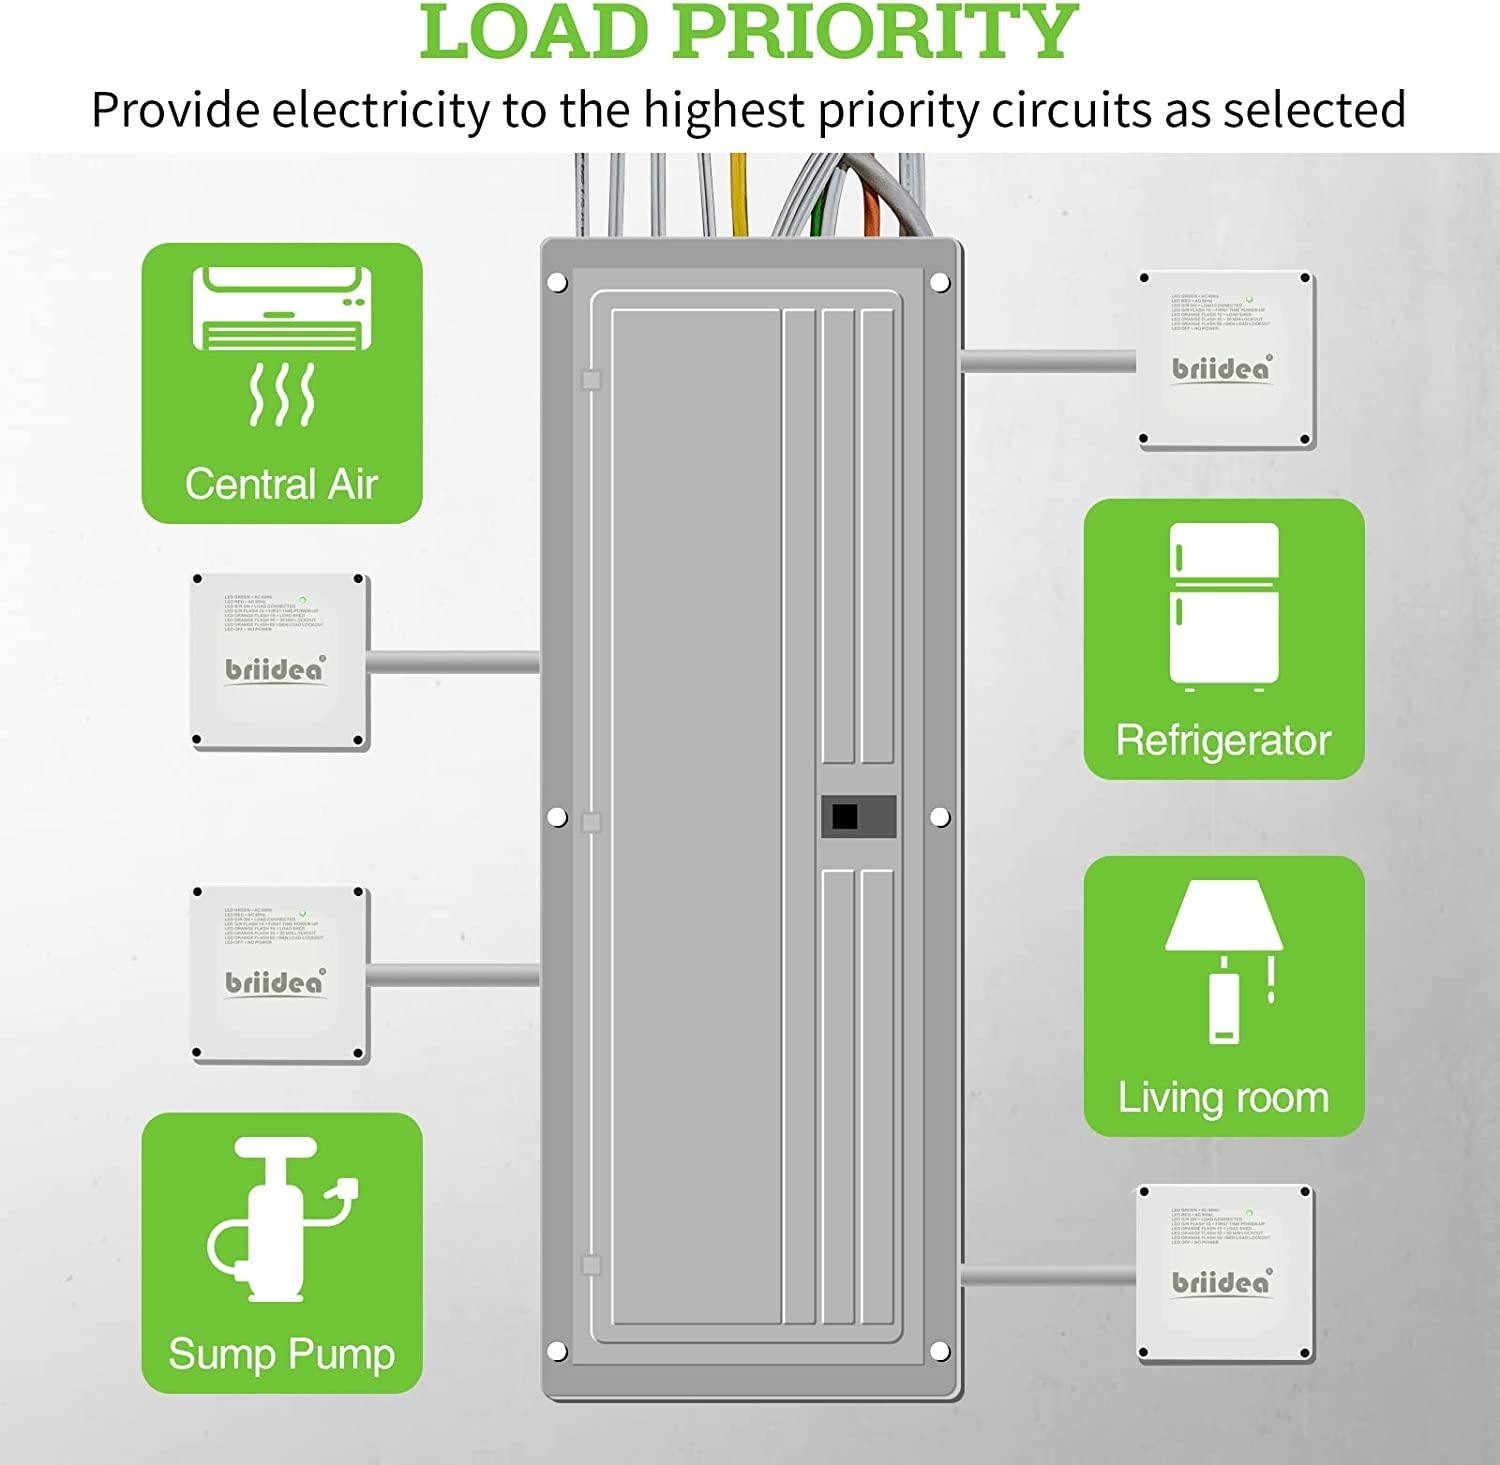 50 Amp Smart Management Module (SMM), Briidea Load Management Device to Protect Generator from Overload, Gray - briidea